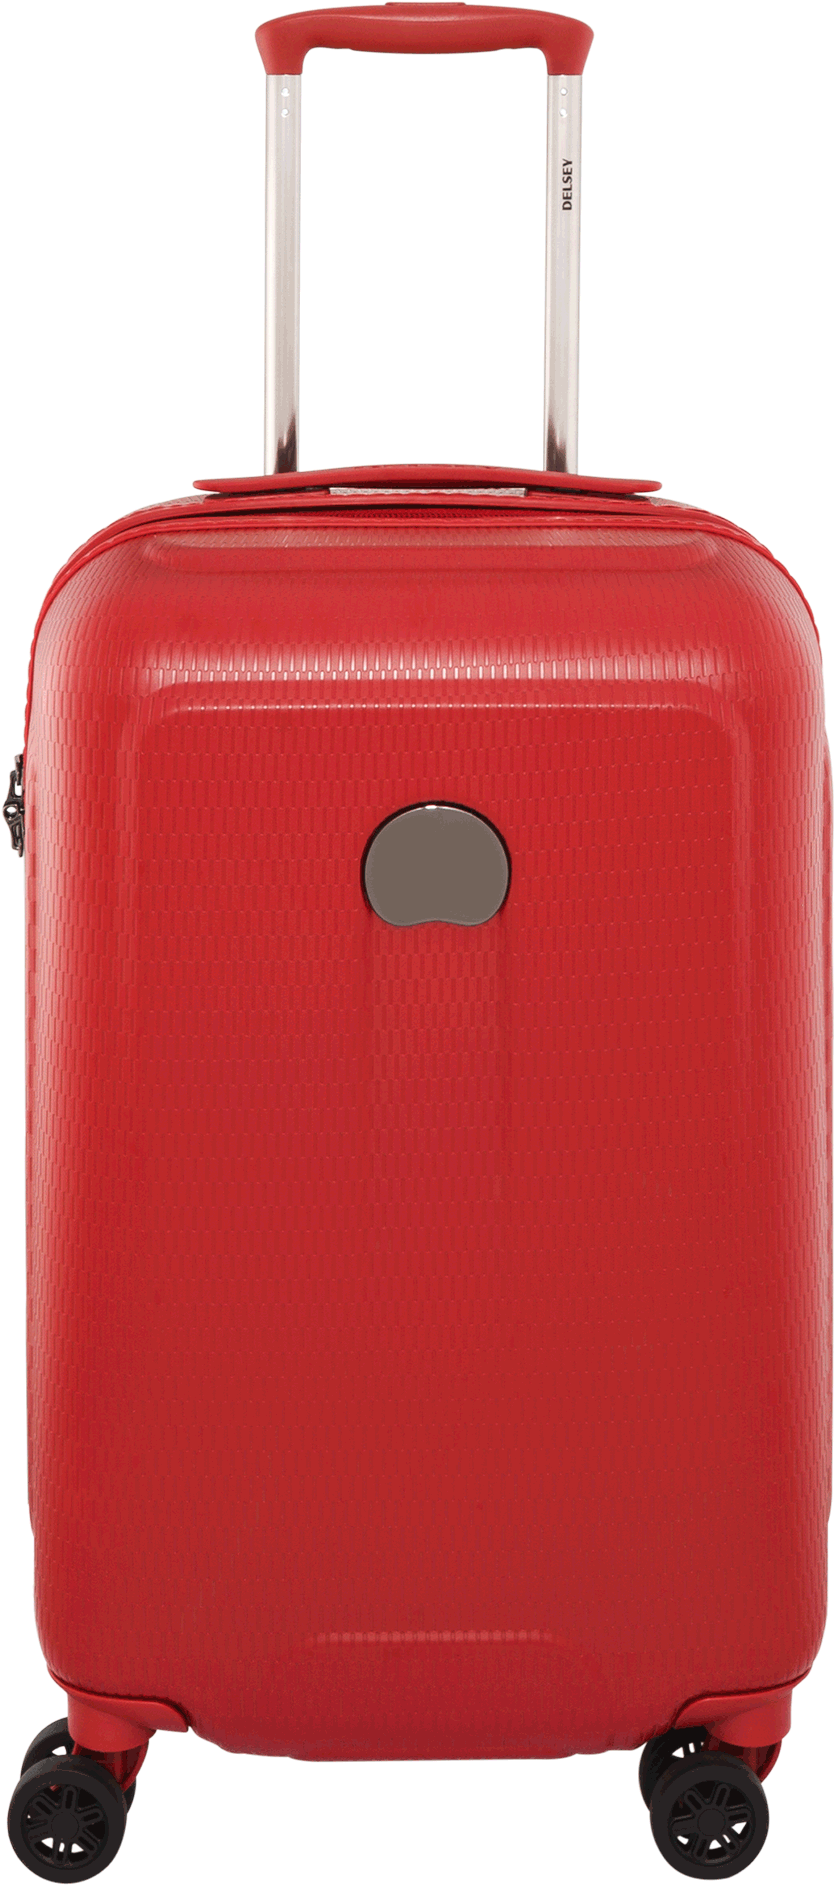 A Red Suitcase With A Hole In The Middle